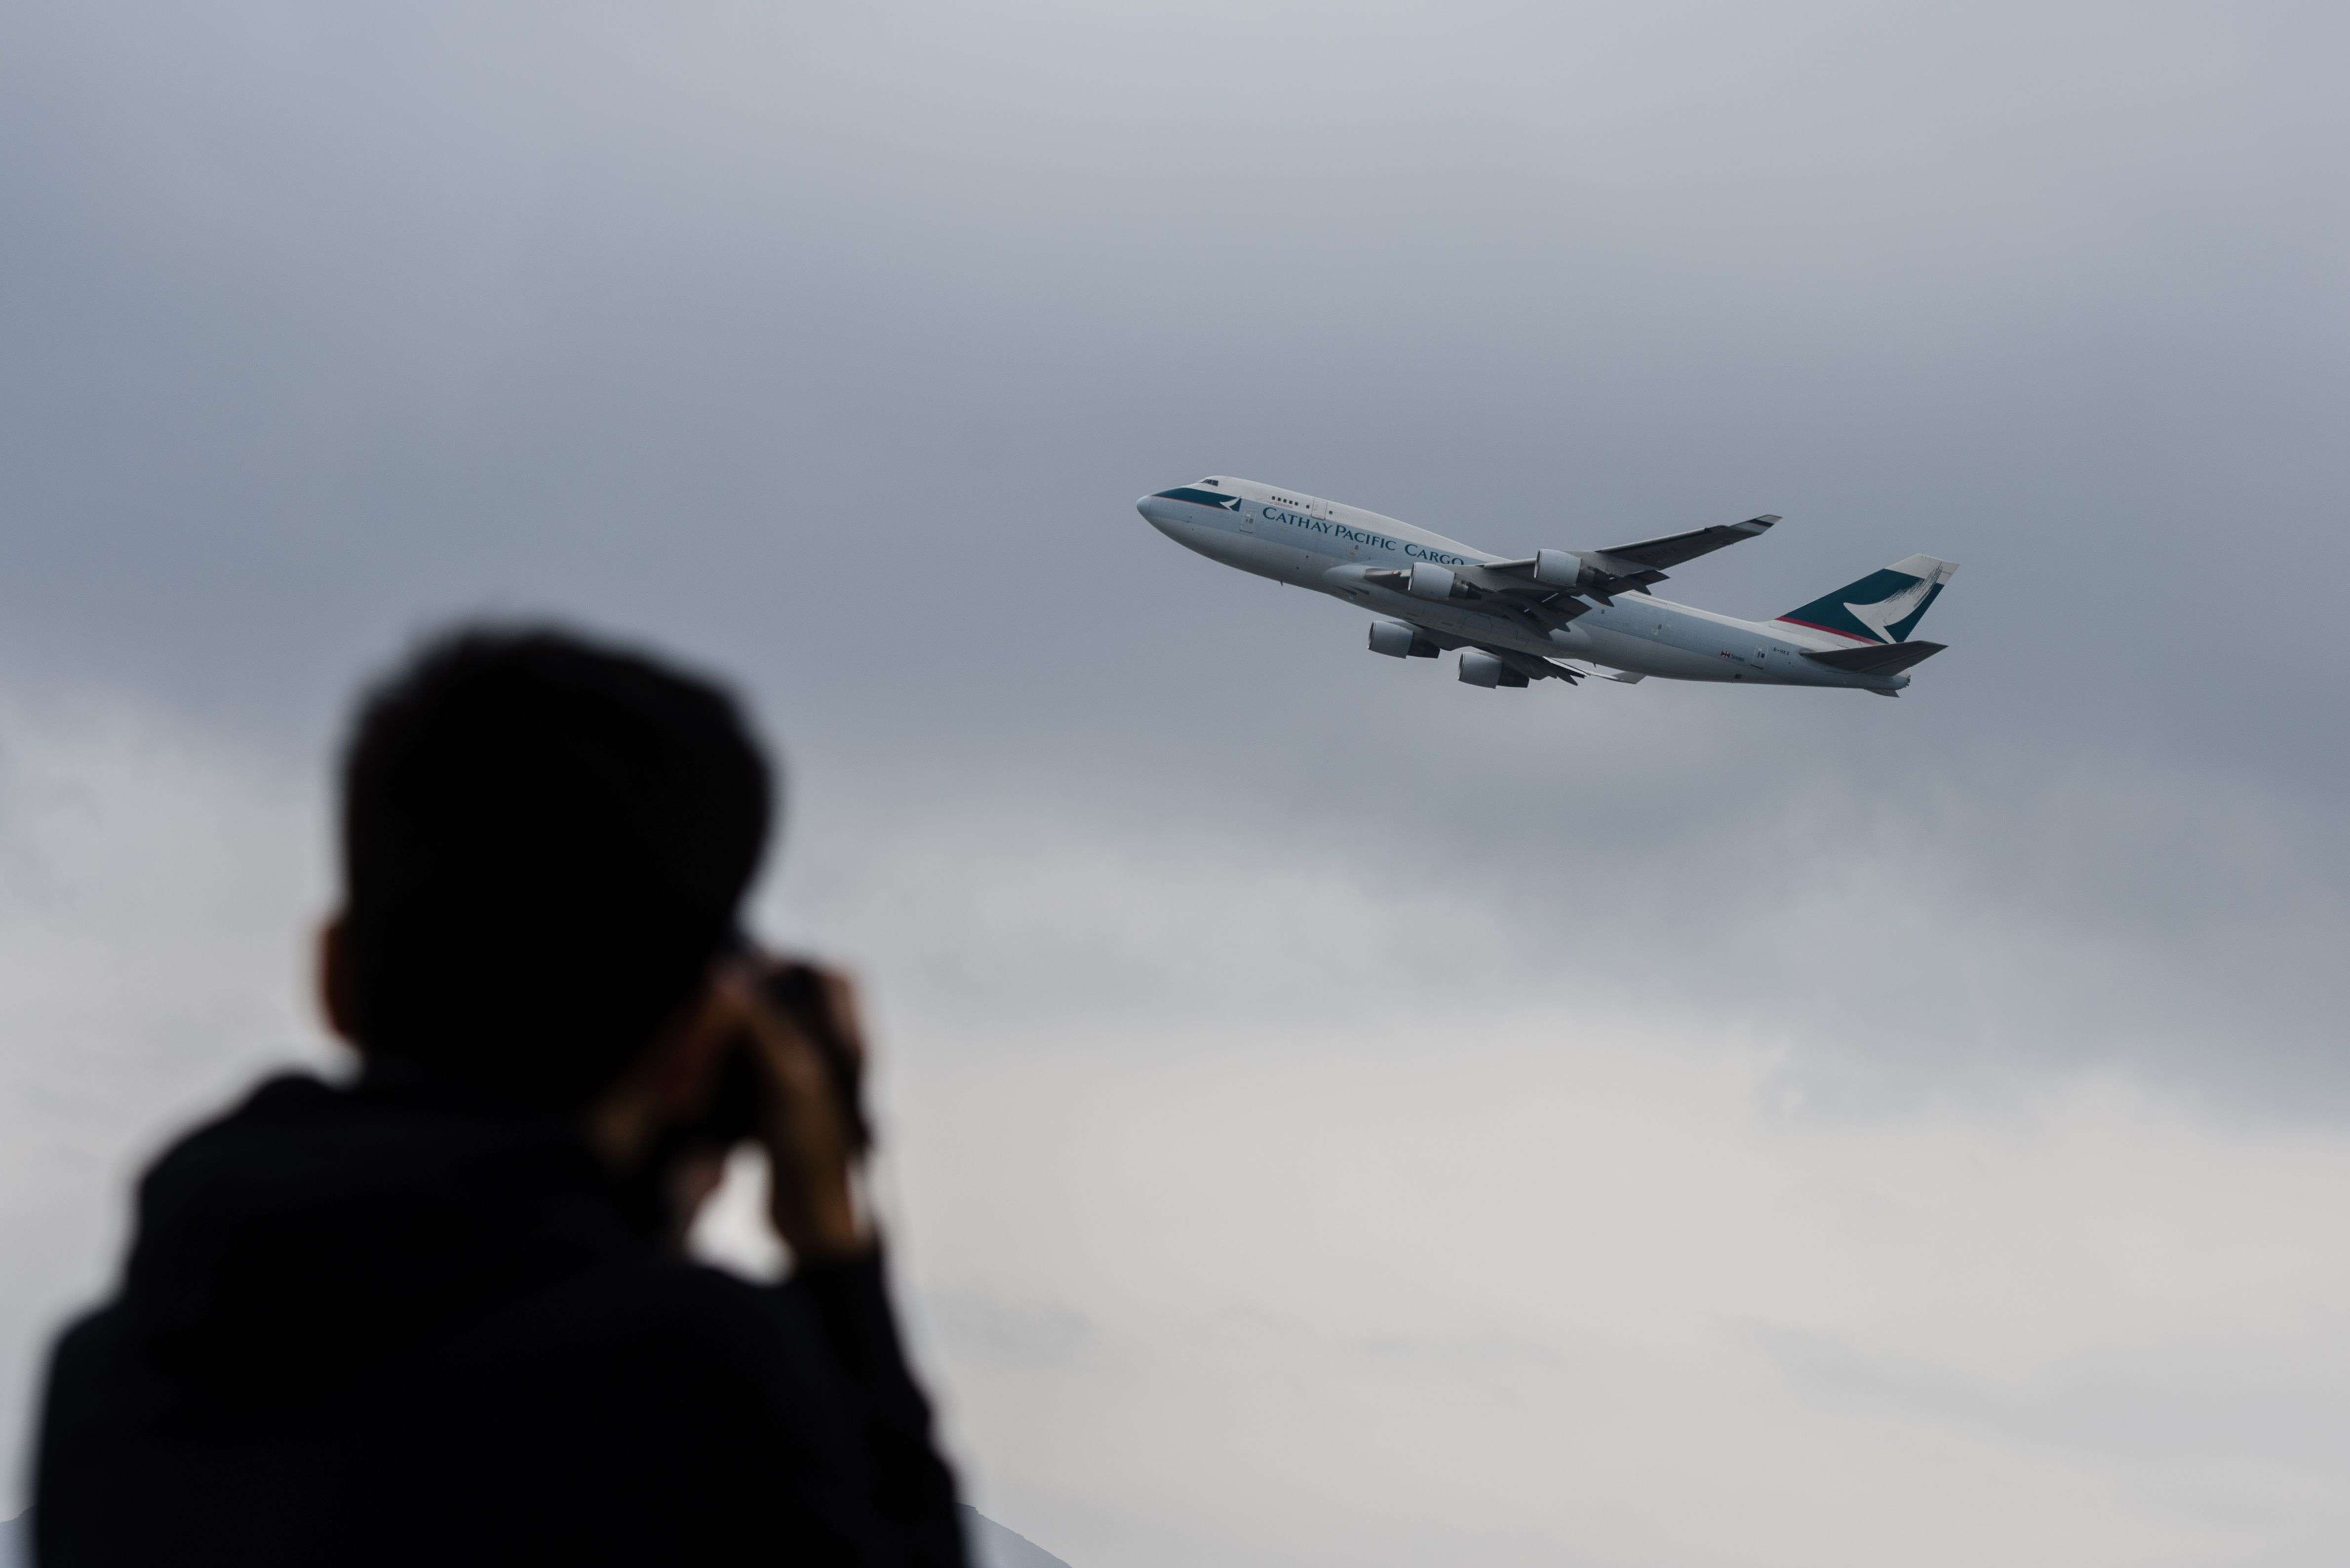 An aviation enthusiast photographs a Cathay Pacific cargo plane as it takes off from the international airport in Hong Kong this month. Symbolically, Cathay is to Hong Kong’s autonomy in the air what the territory’s political and economic institutions are to its special status on the ground. Photo: AFP